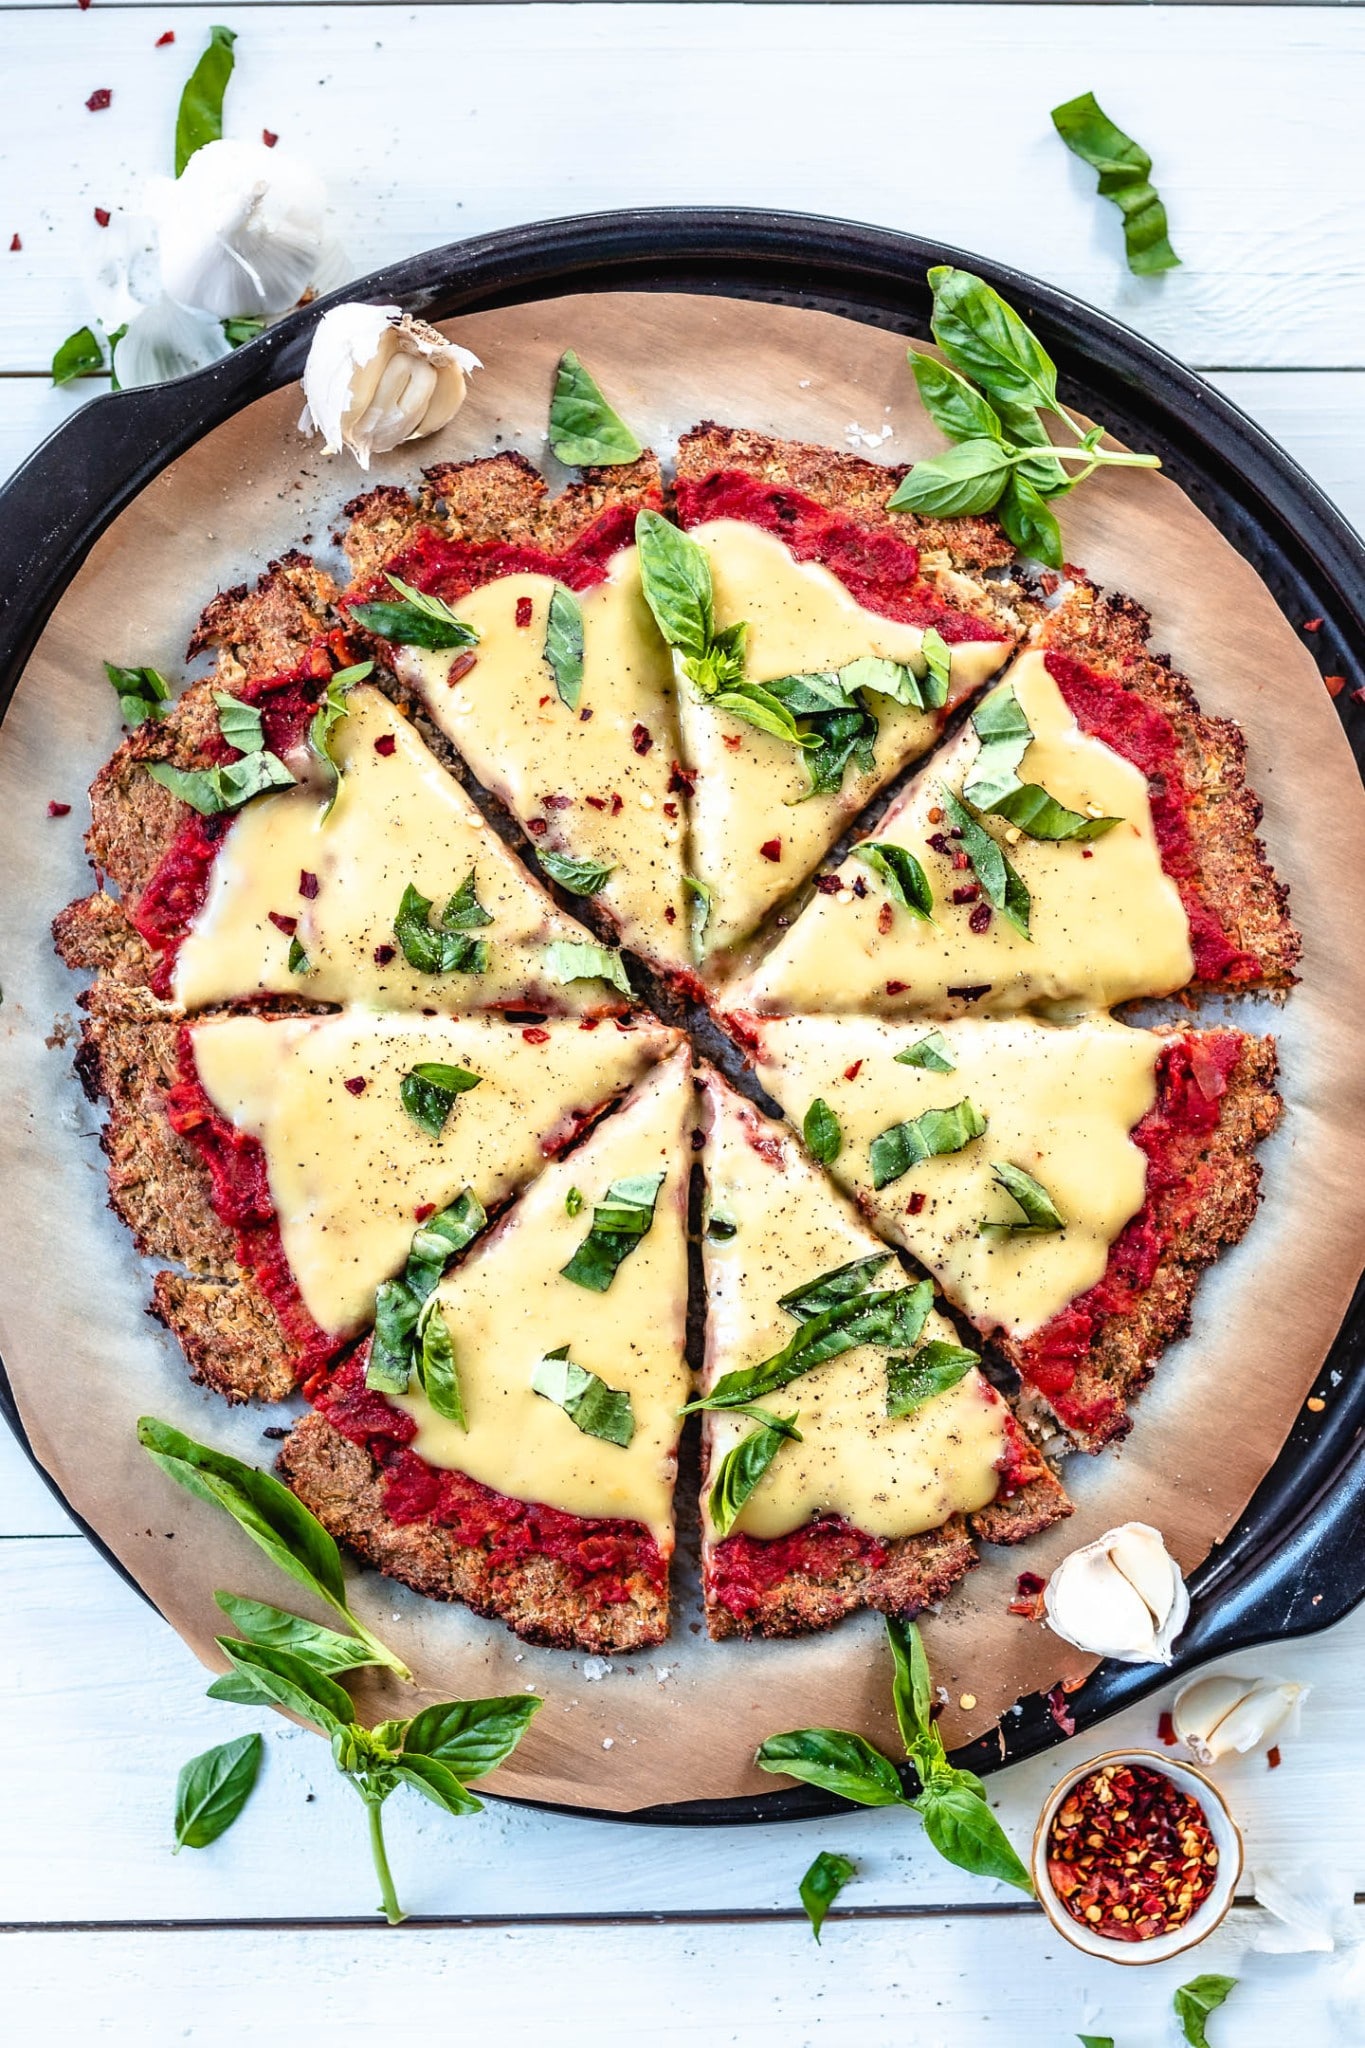 This vegan cauliflower pizza crust is made with just 7 ingredients. It’s crispy and golden, gluten-free and oil-free. Smothered with a simple pizza sauce and topped with homemade vegan mozzarella cheese. All-in-all it’s a warm, savoury, and comforting recipe. Perfect for Friday pizza night.